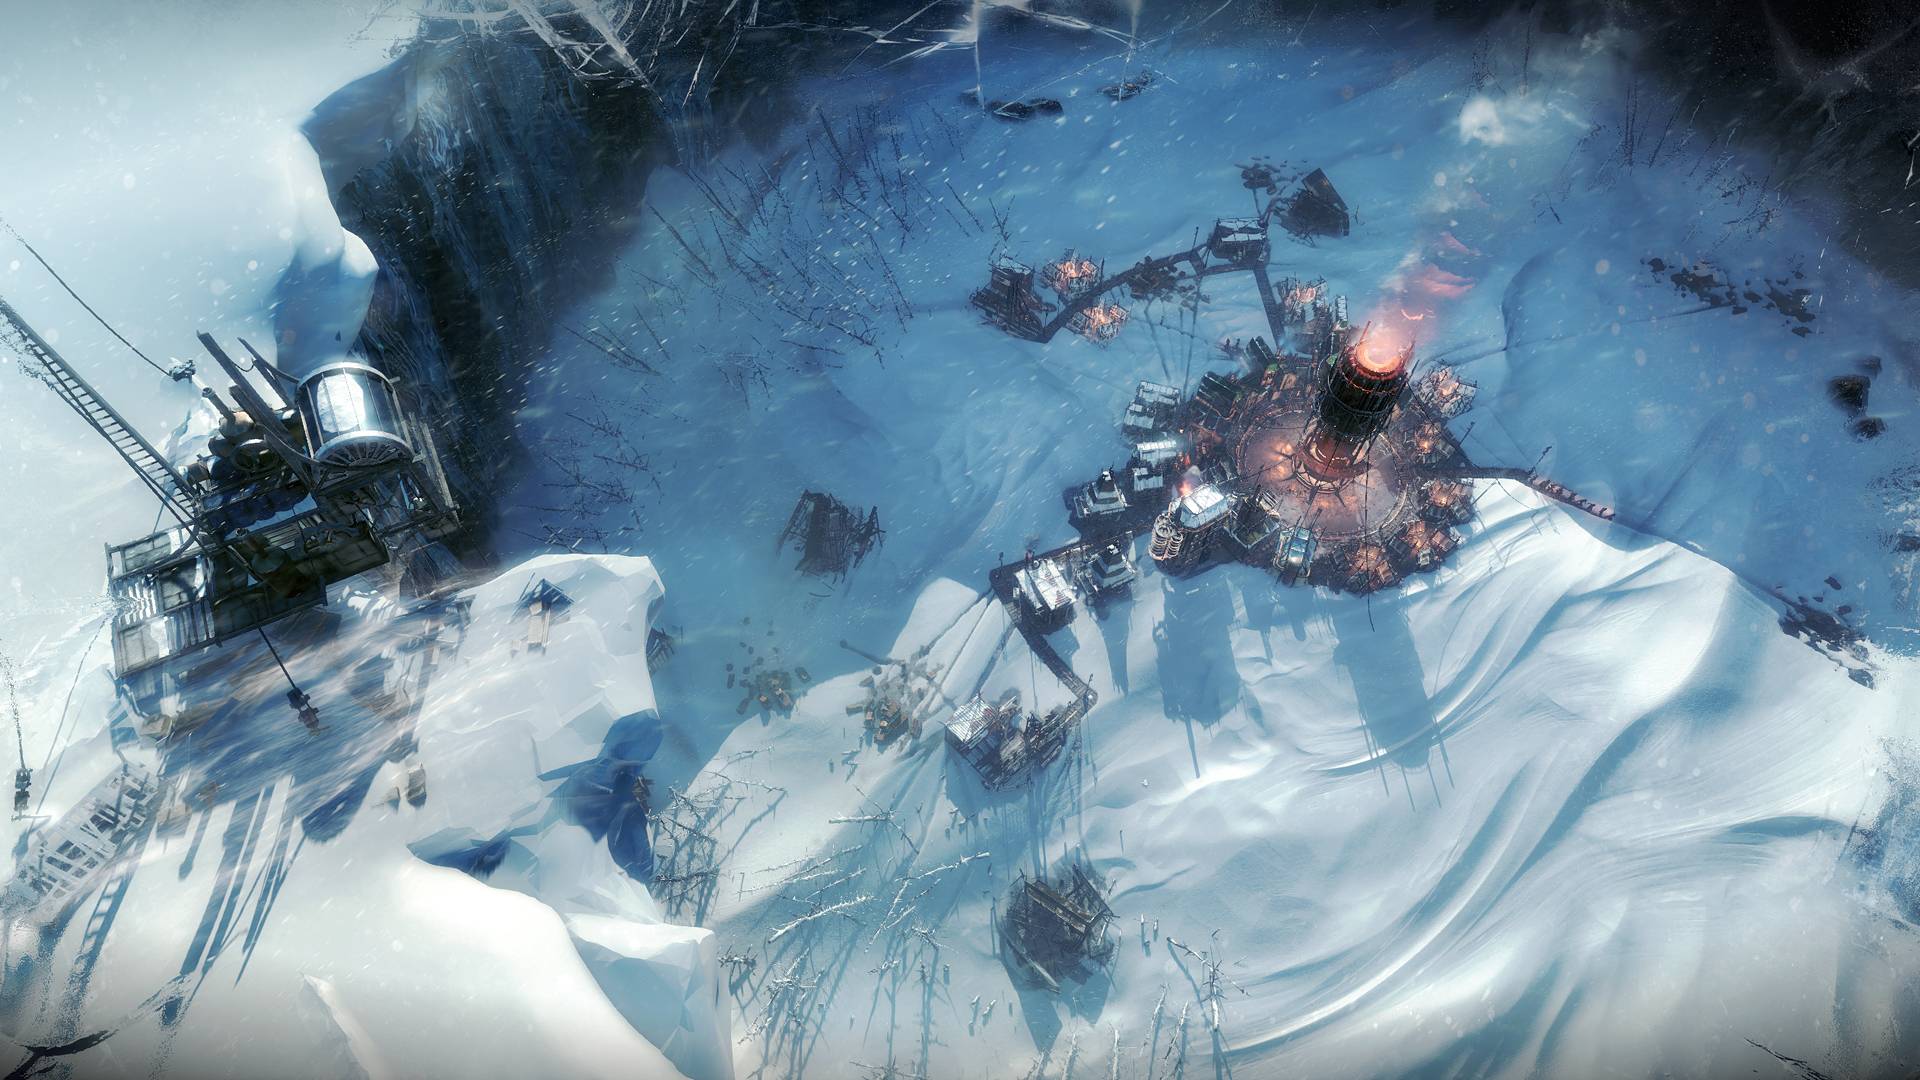 Best city-building games: Frostpunk. Image shows an industrial settlement in a snowy landscape.